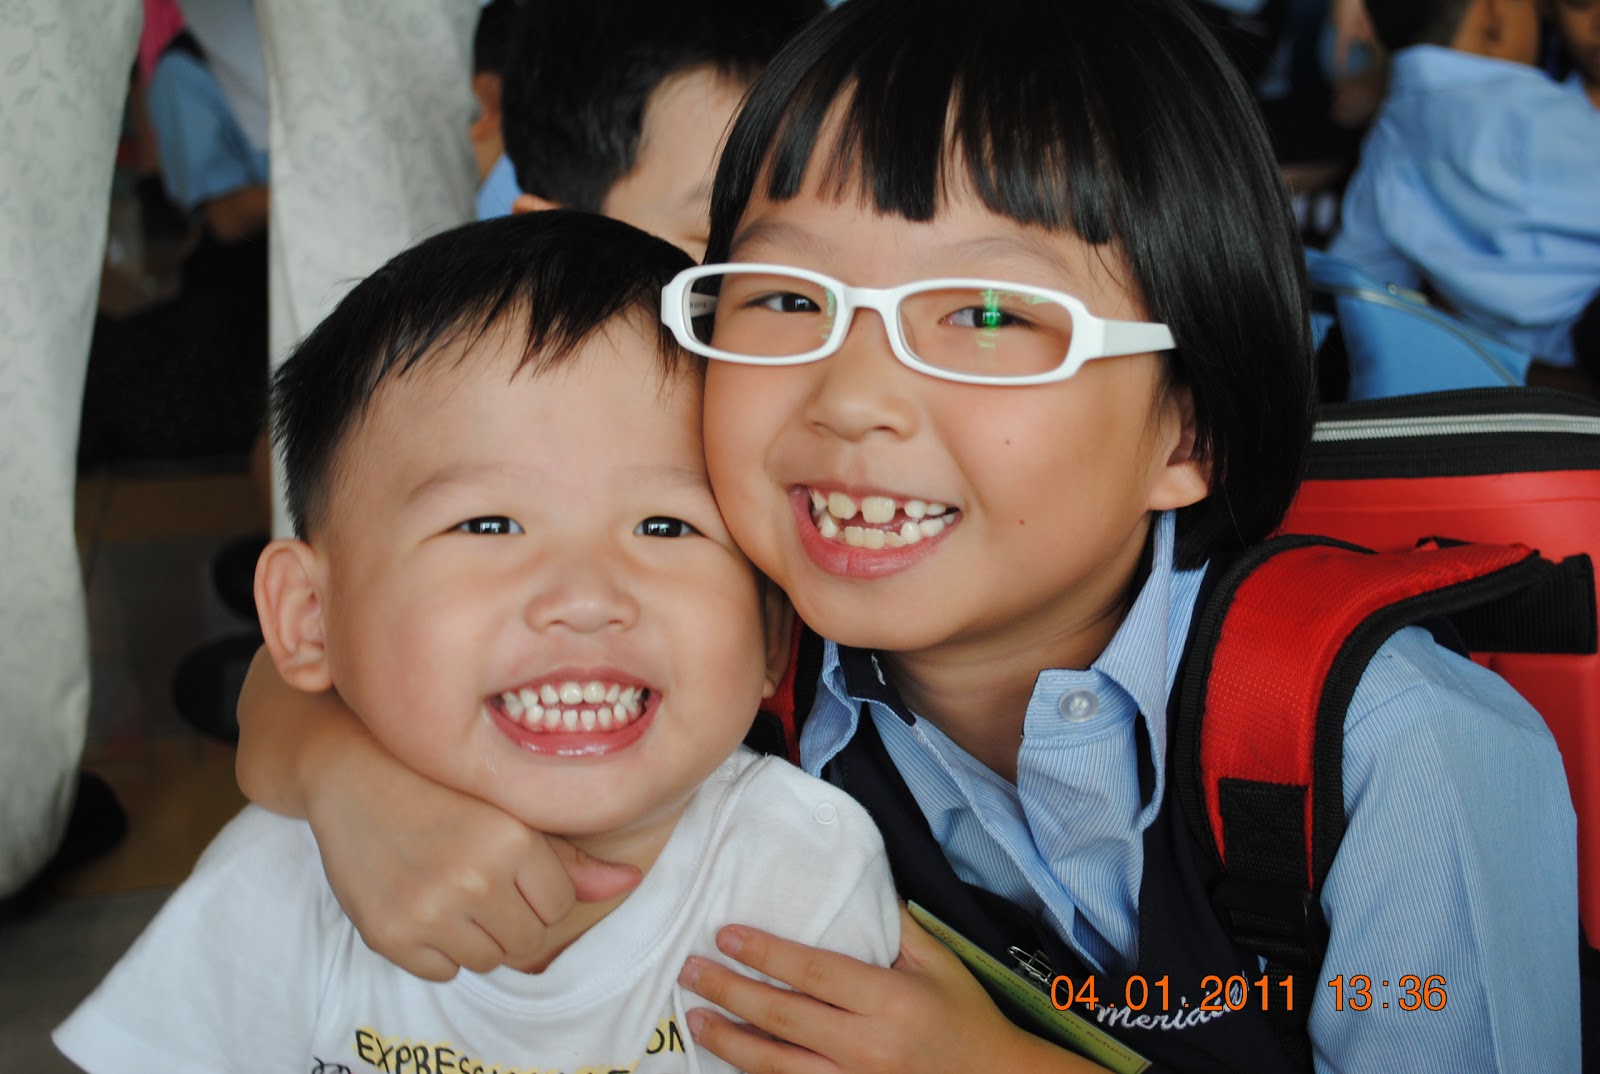 Meridian Primary School Singapore: First Day Of School 2011 ...